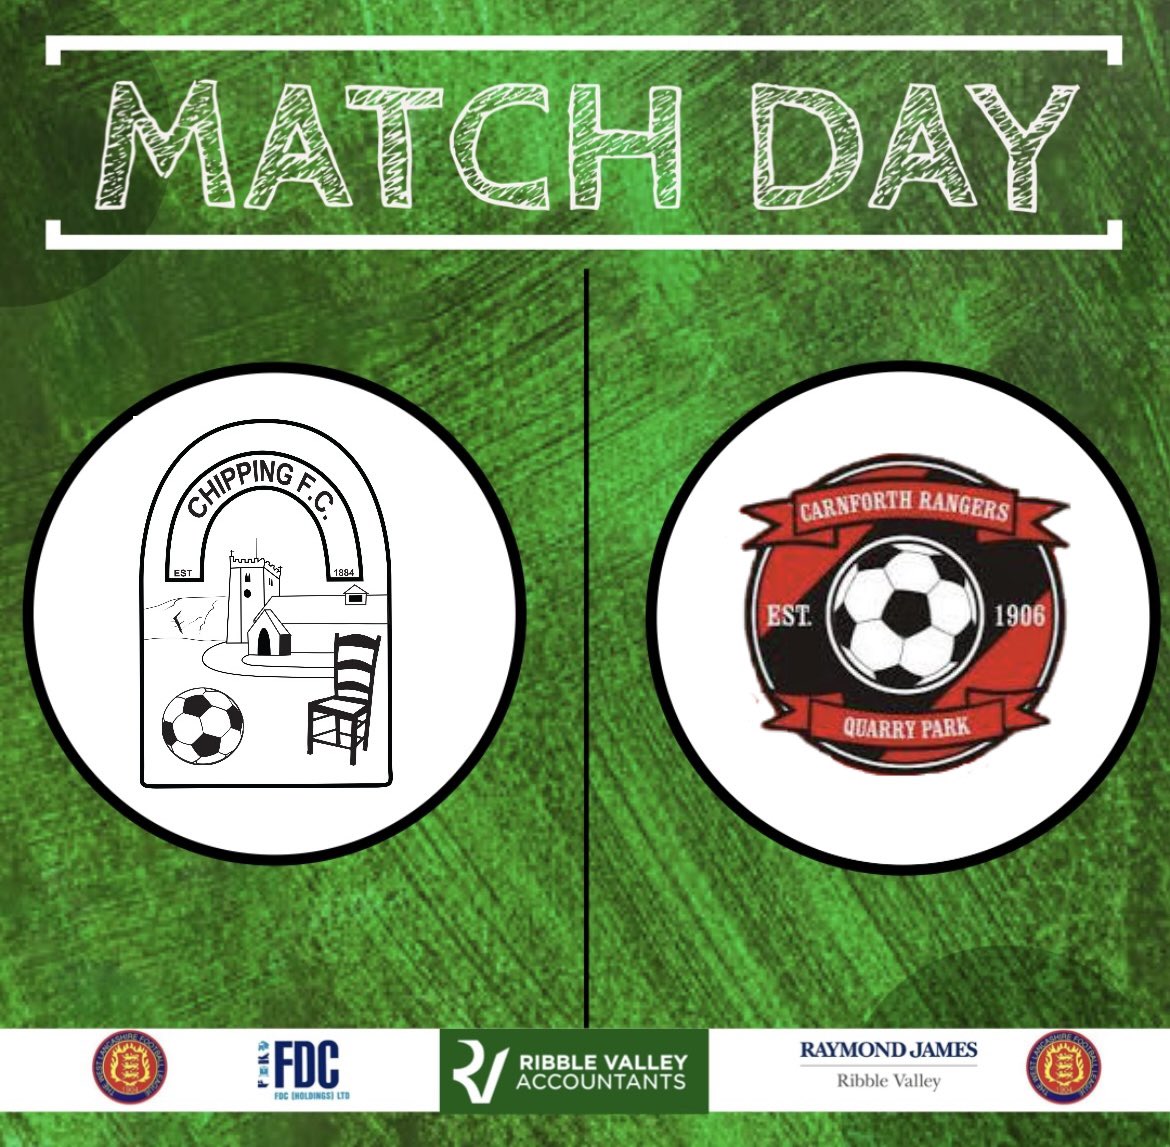 MATCH DAY ⚽️Chipping Vs. Carnforth 🏆Challenge Cup Final 📍Longridge Town FC 📅Tuesday 30th April ⏰7:30pm Ko 💰Admission £6 Adults 💰£3 Kids & Concessions (Admission fees are charged by the West Lancashire Football league and not by LTFC) 💚All support greatly appreciated